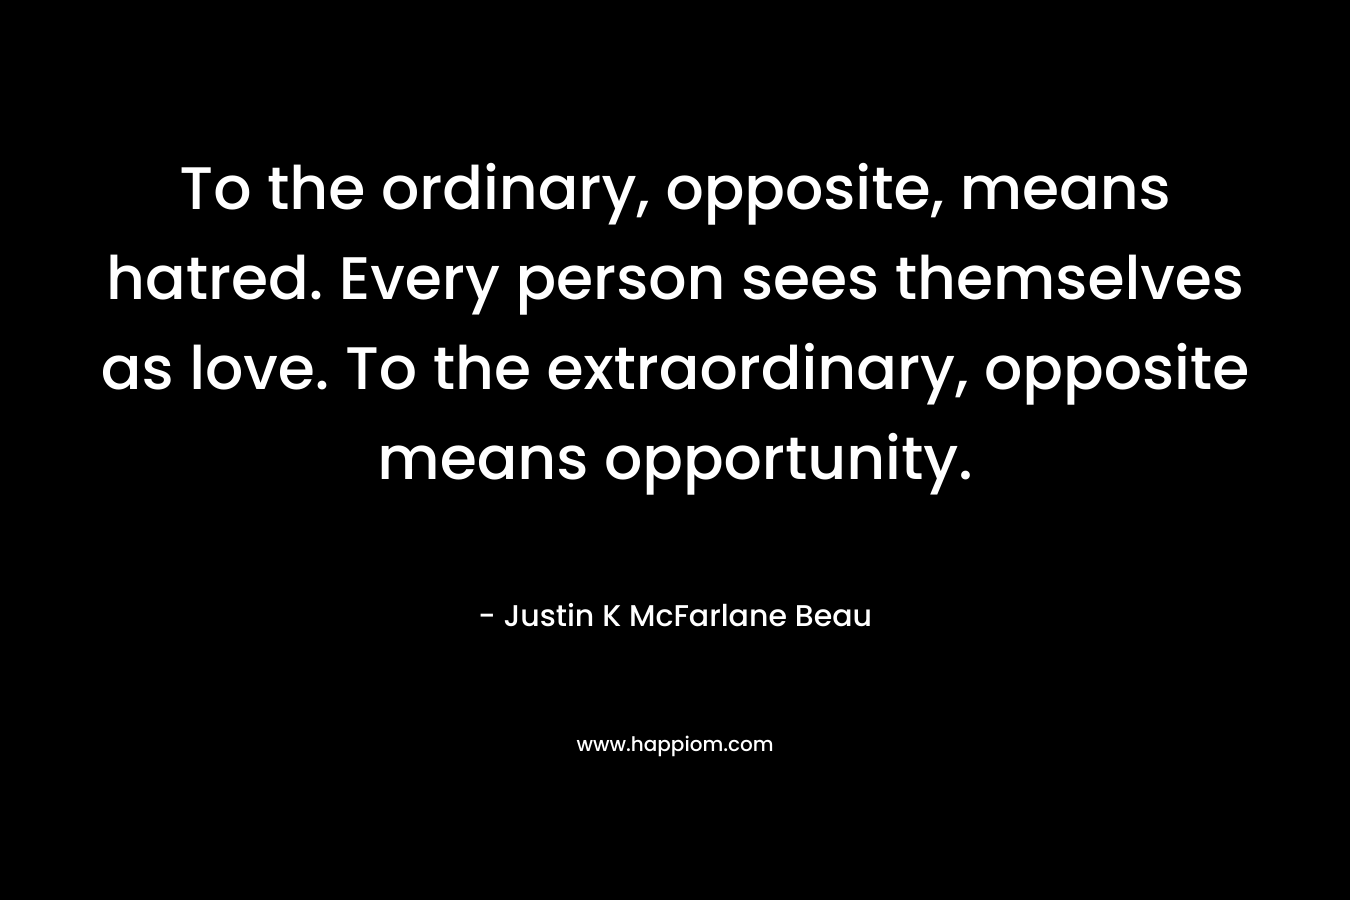 To the ordinary, opposite, means hatred. Every person sees themselves as love. To the extraordinary, opposite means opportunity.